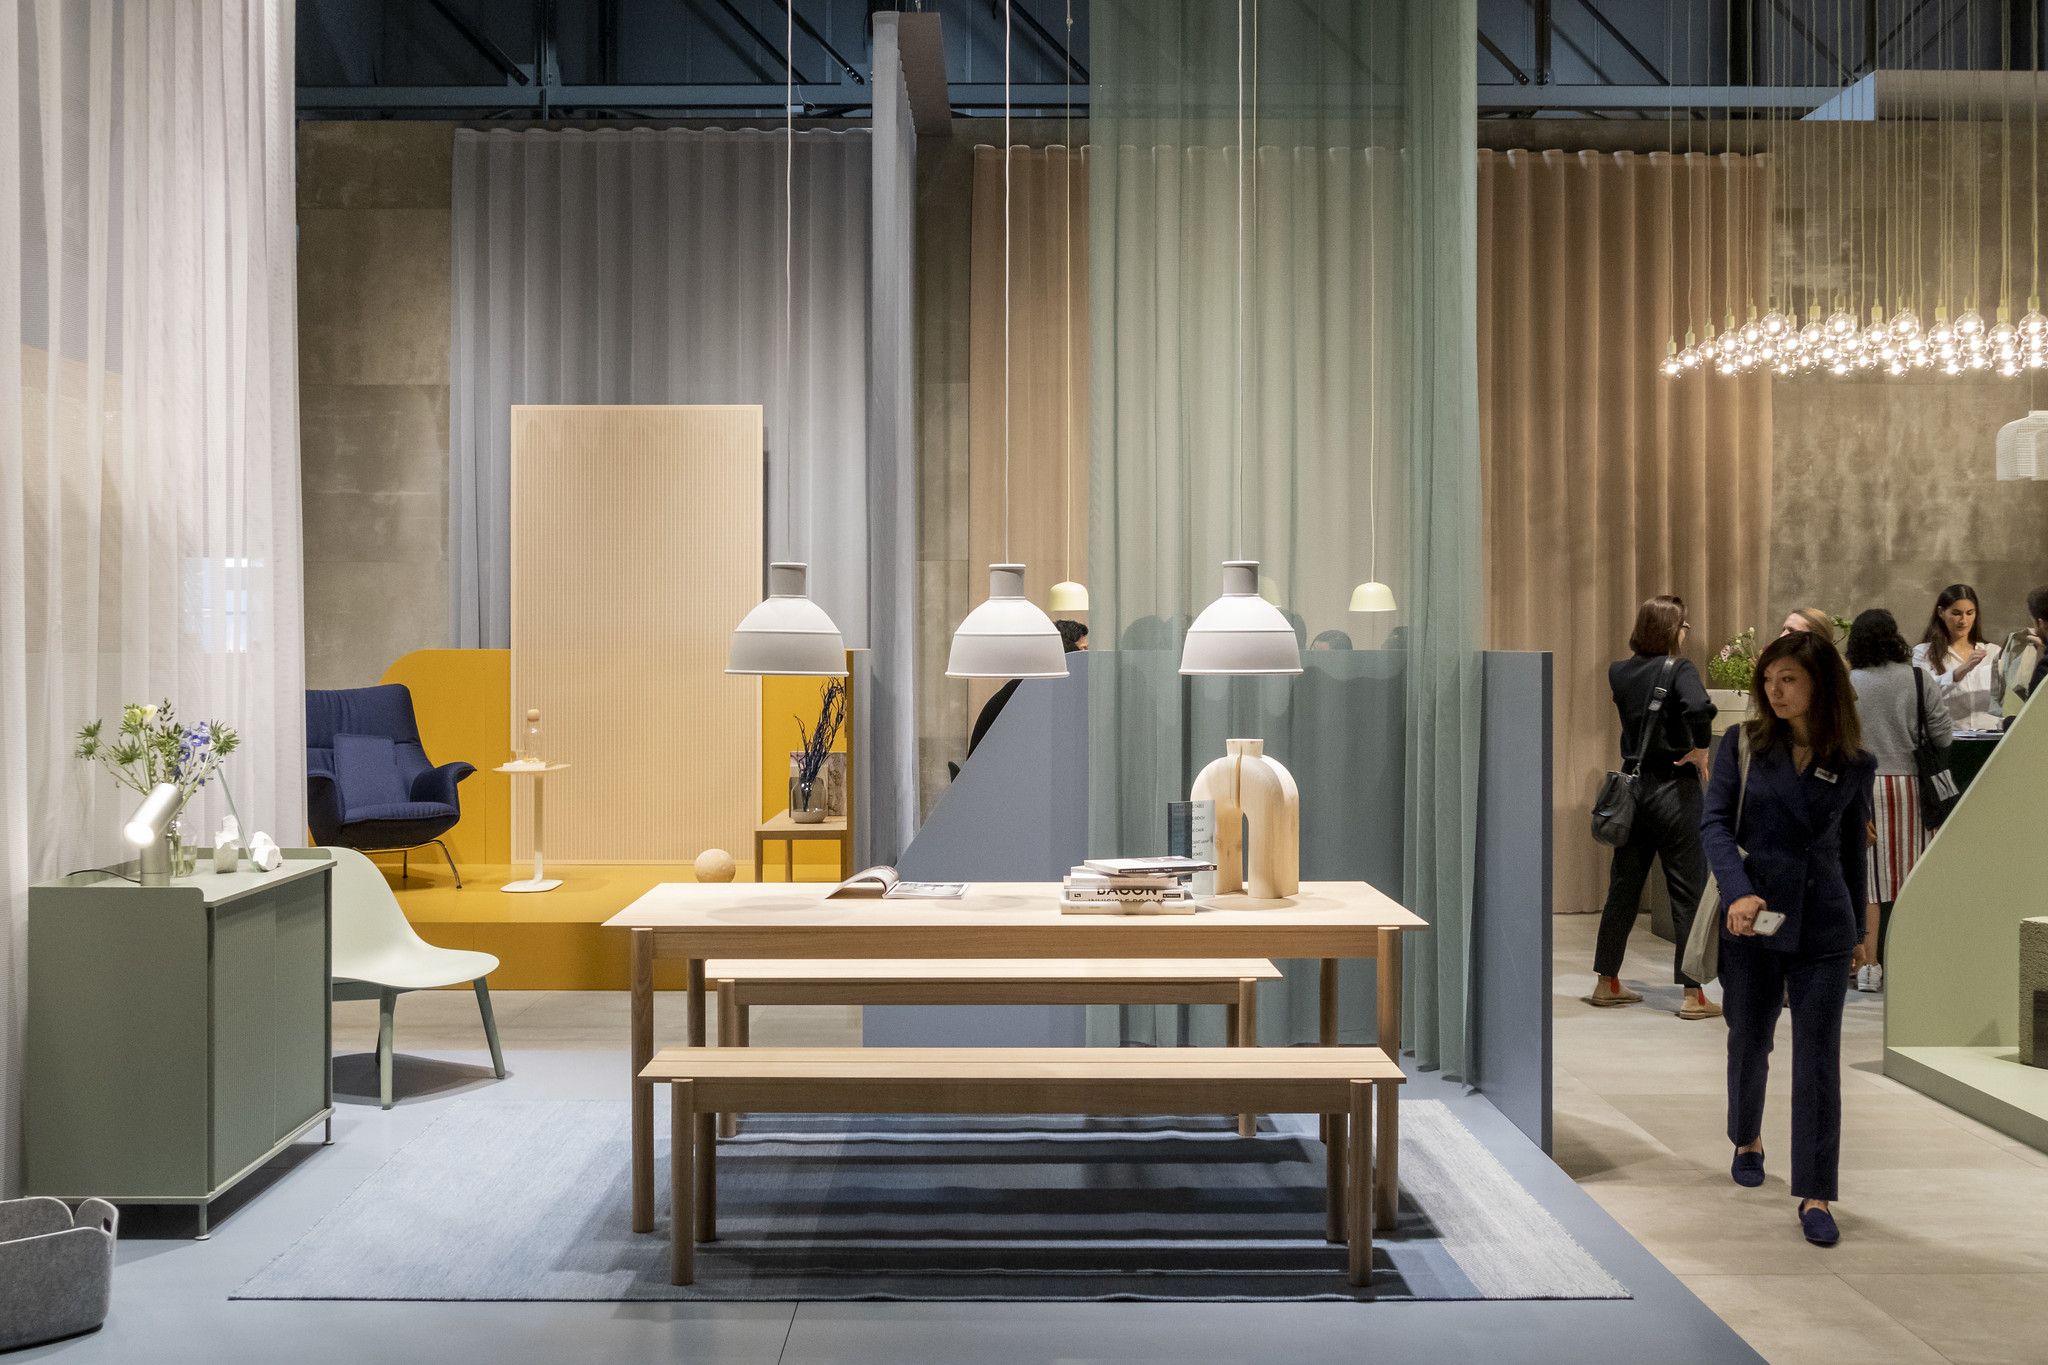 Salone Del Mobile 2022 The Milano Design Event You Don't Want To Miss